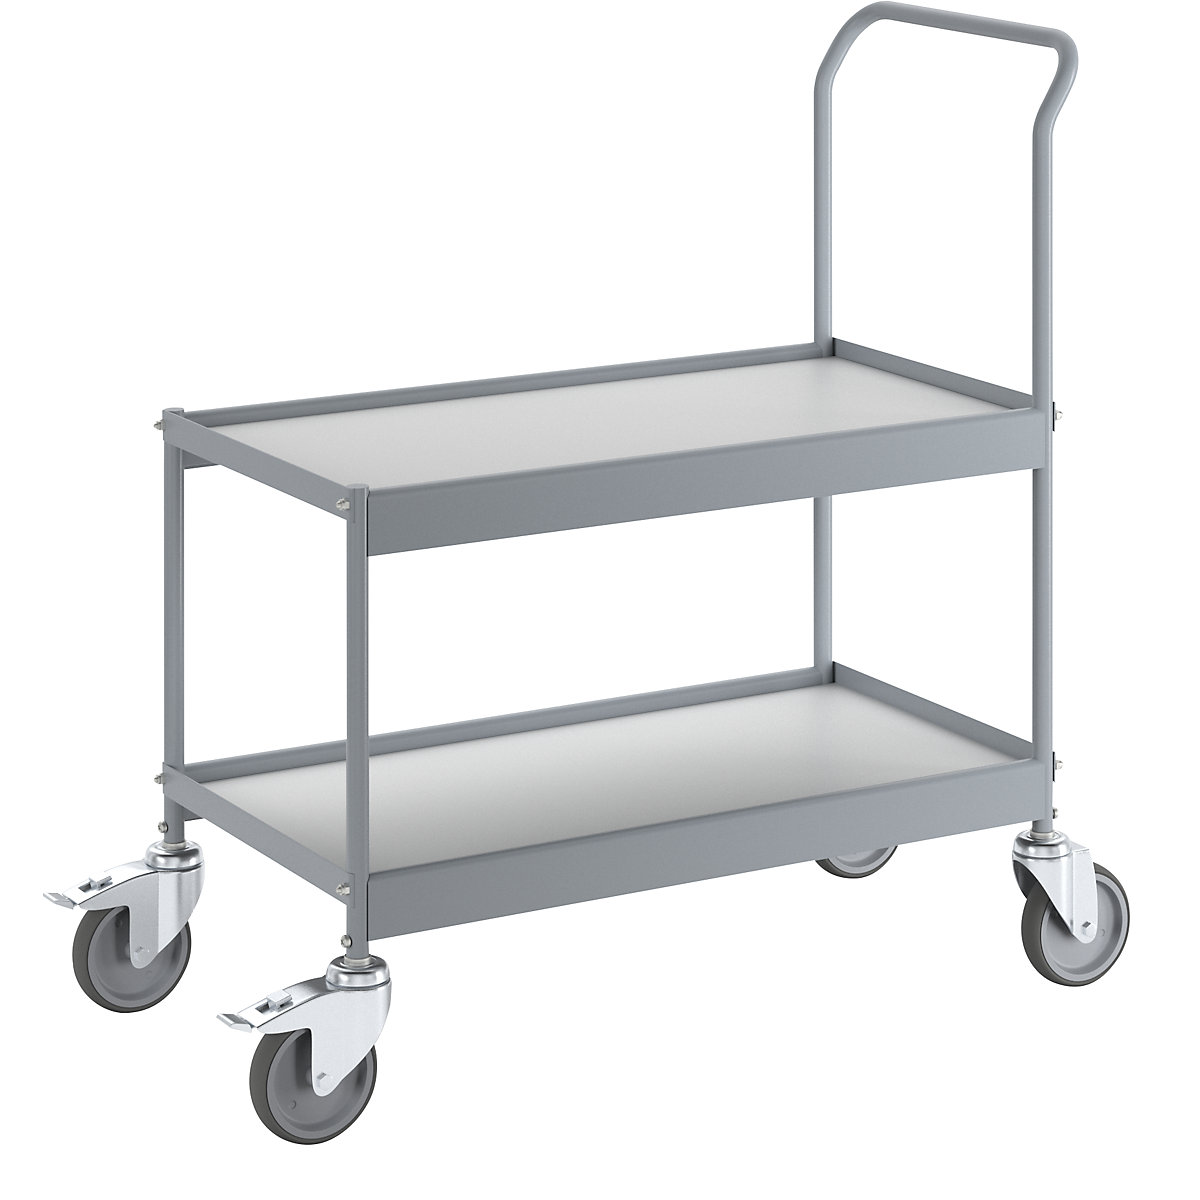 Table trolley, max. load 150 kg on 2 shelves, LxW 790 x 425 mm, with 2 swivel castors with double stops-2